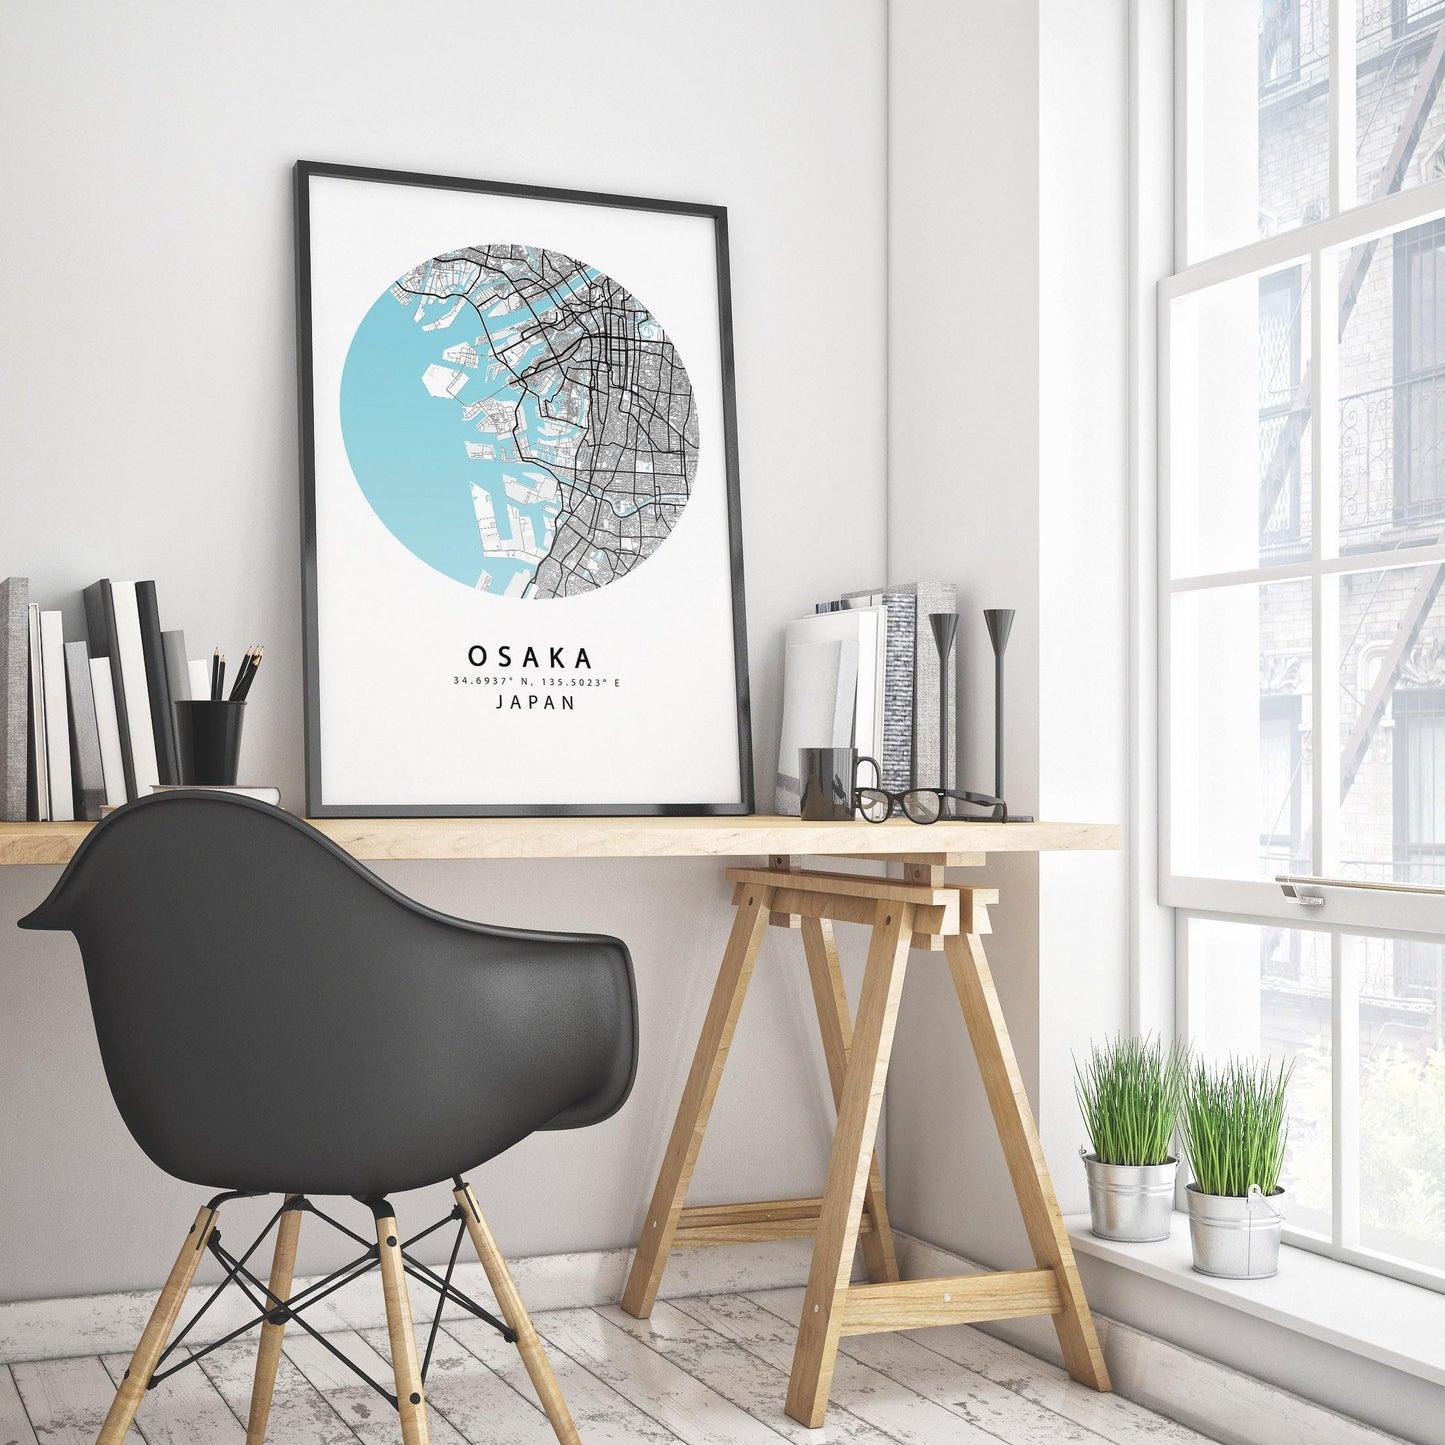 Get your bearings in the amazing city of Osaka with this Street Map Print. This Japan Map Art Poster is the perfect way to keep track of all the exciting places you visit. With clear and easy to read labeling, you'll be able to track your adventures and see where you've been and what you've seen with ease. A beautiful and stylish addition to any room, this Street Map Print is a must-have for anyone who loves to travel.